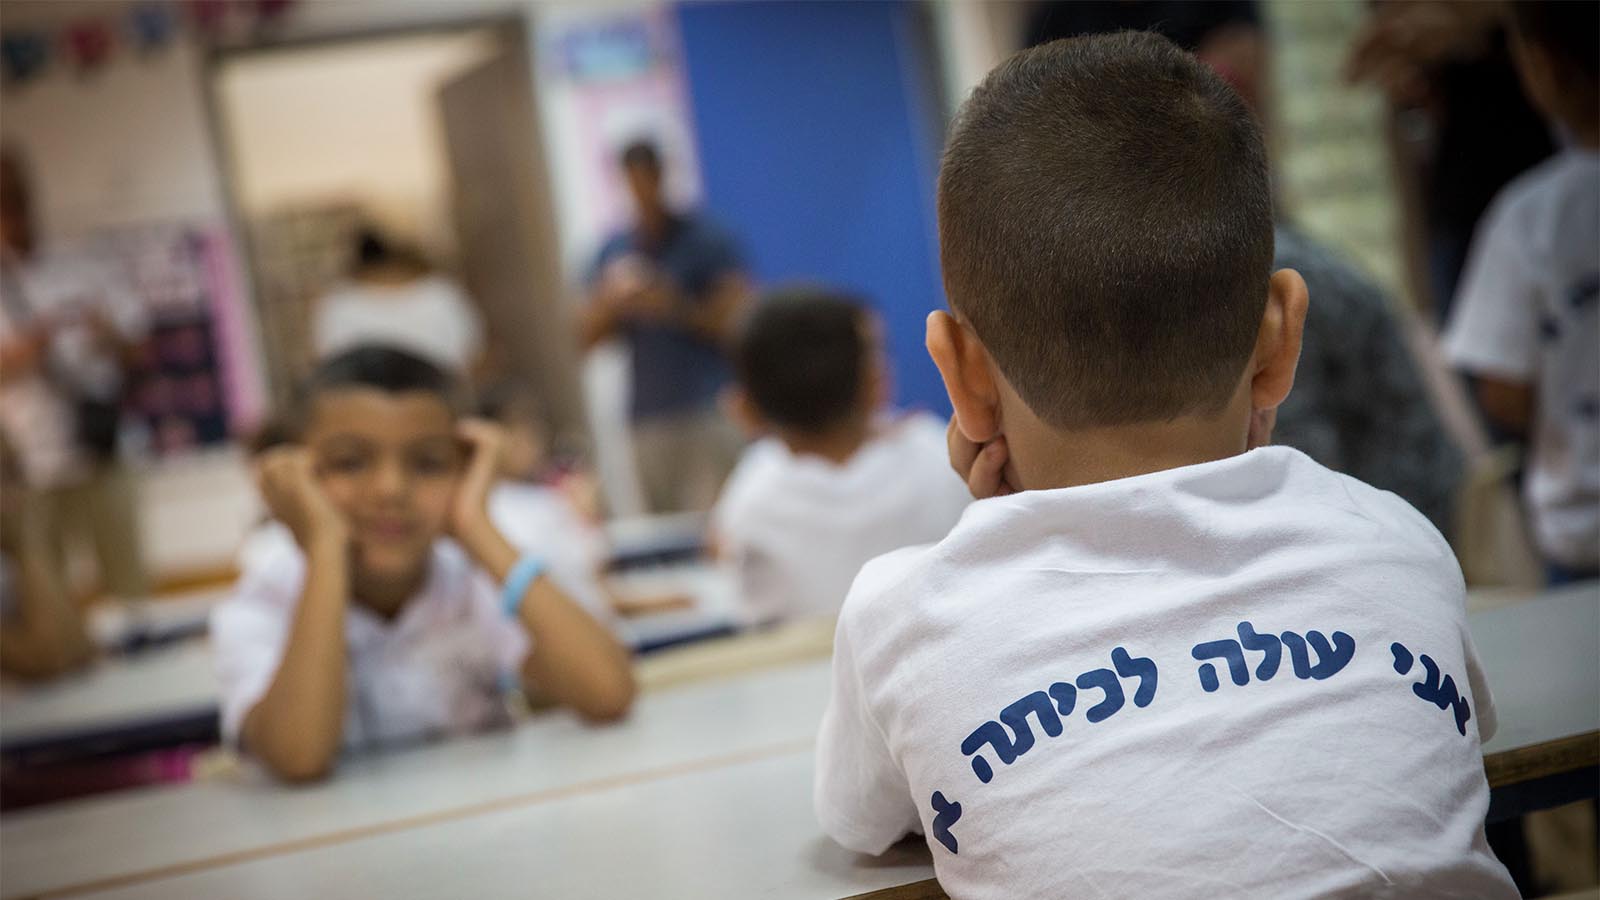 First grade students sit in a classroom on their first day of school in Ma'ale Adumim, September 1, 2016. (Photo by Hadas Parush/Flash90)